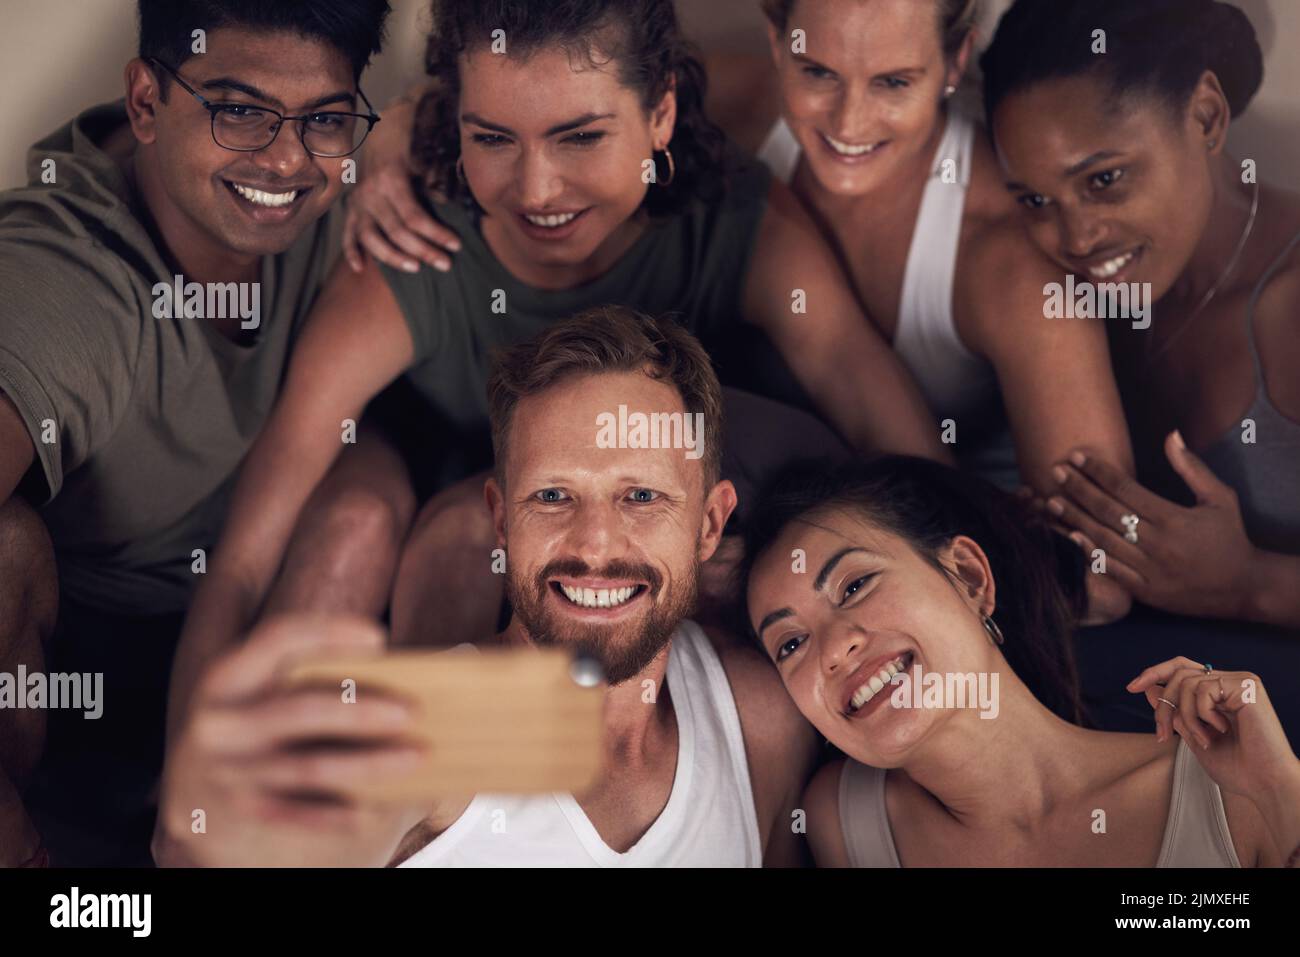 Gym selfies are always the best. a group of young people taking selfies after working out together in a yoga class. Stock Photo